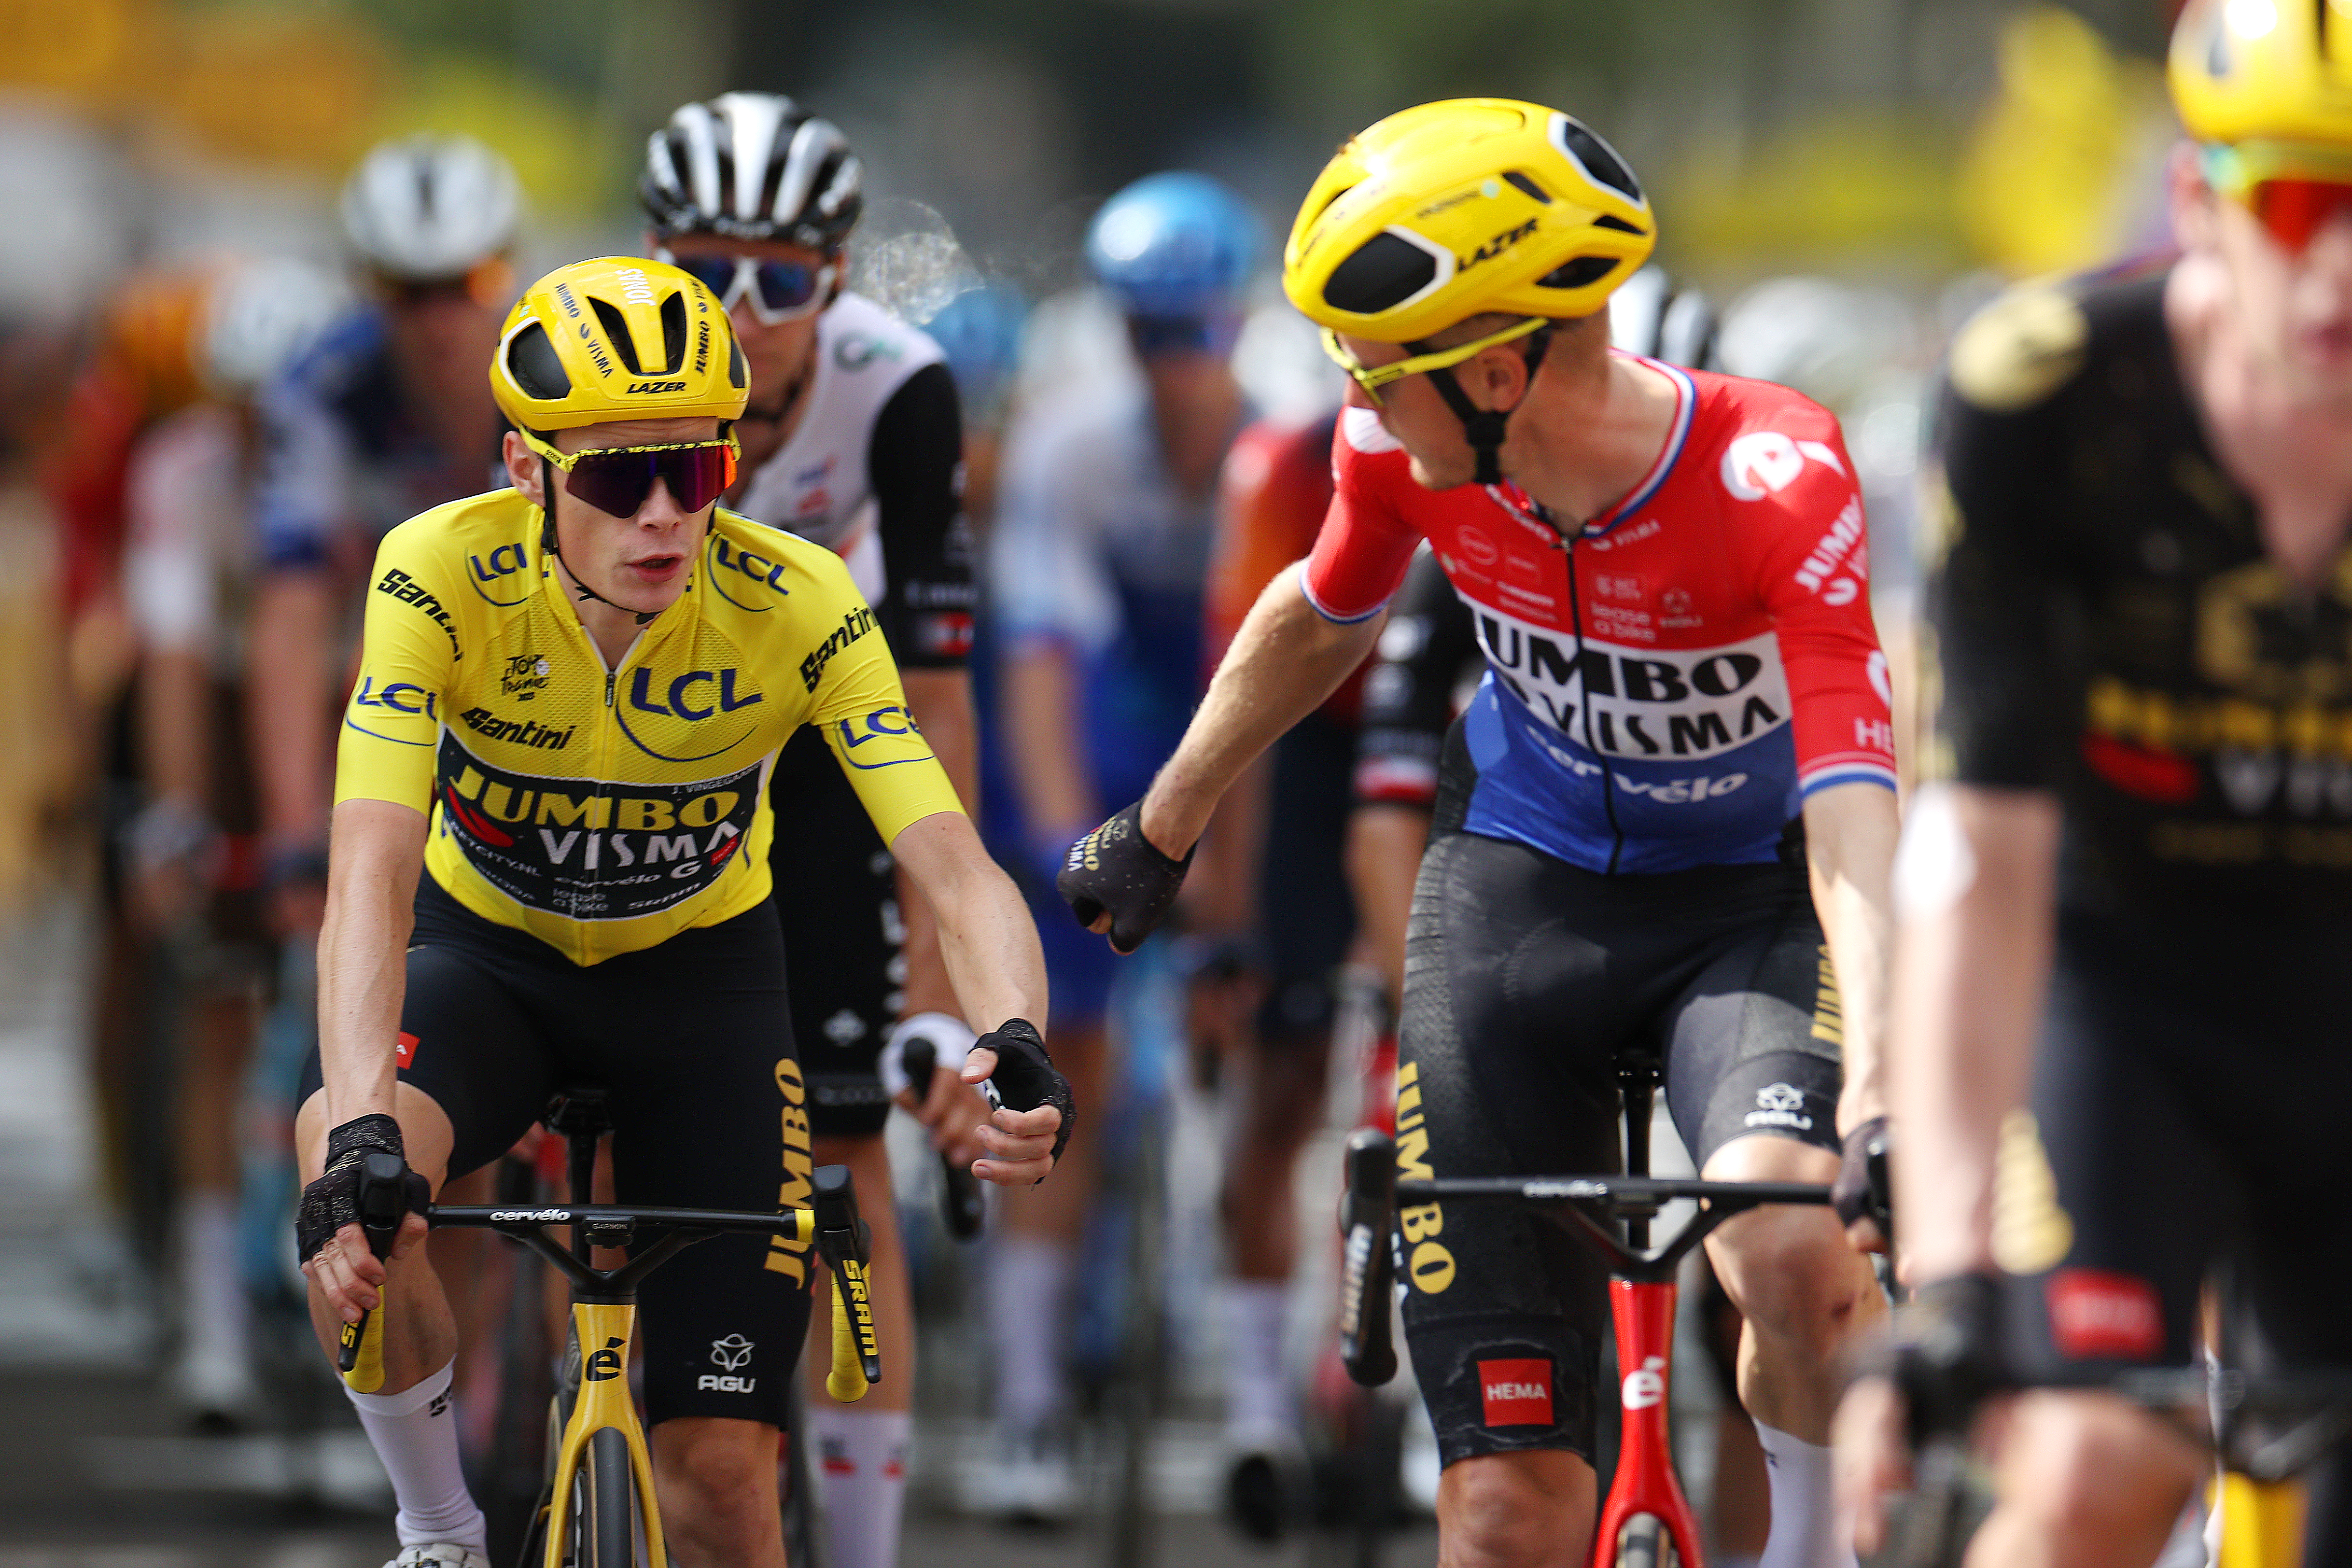 Jonas Vingegaard of Denmark - Yellow Leader Jersey and Dylan Van Baarle of The Netherlands and Team Jumbo-Visma react after the stage nineteen of the 110th Tour de France 2023 a 172.8km stage from Moirans-en-Montagne to Poligny / #UCIWT / on July 21, 2023 in Poligny, France.